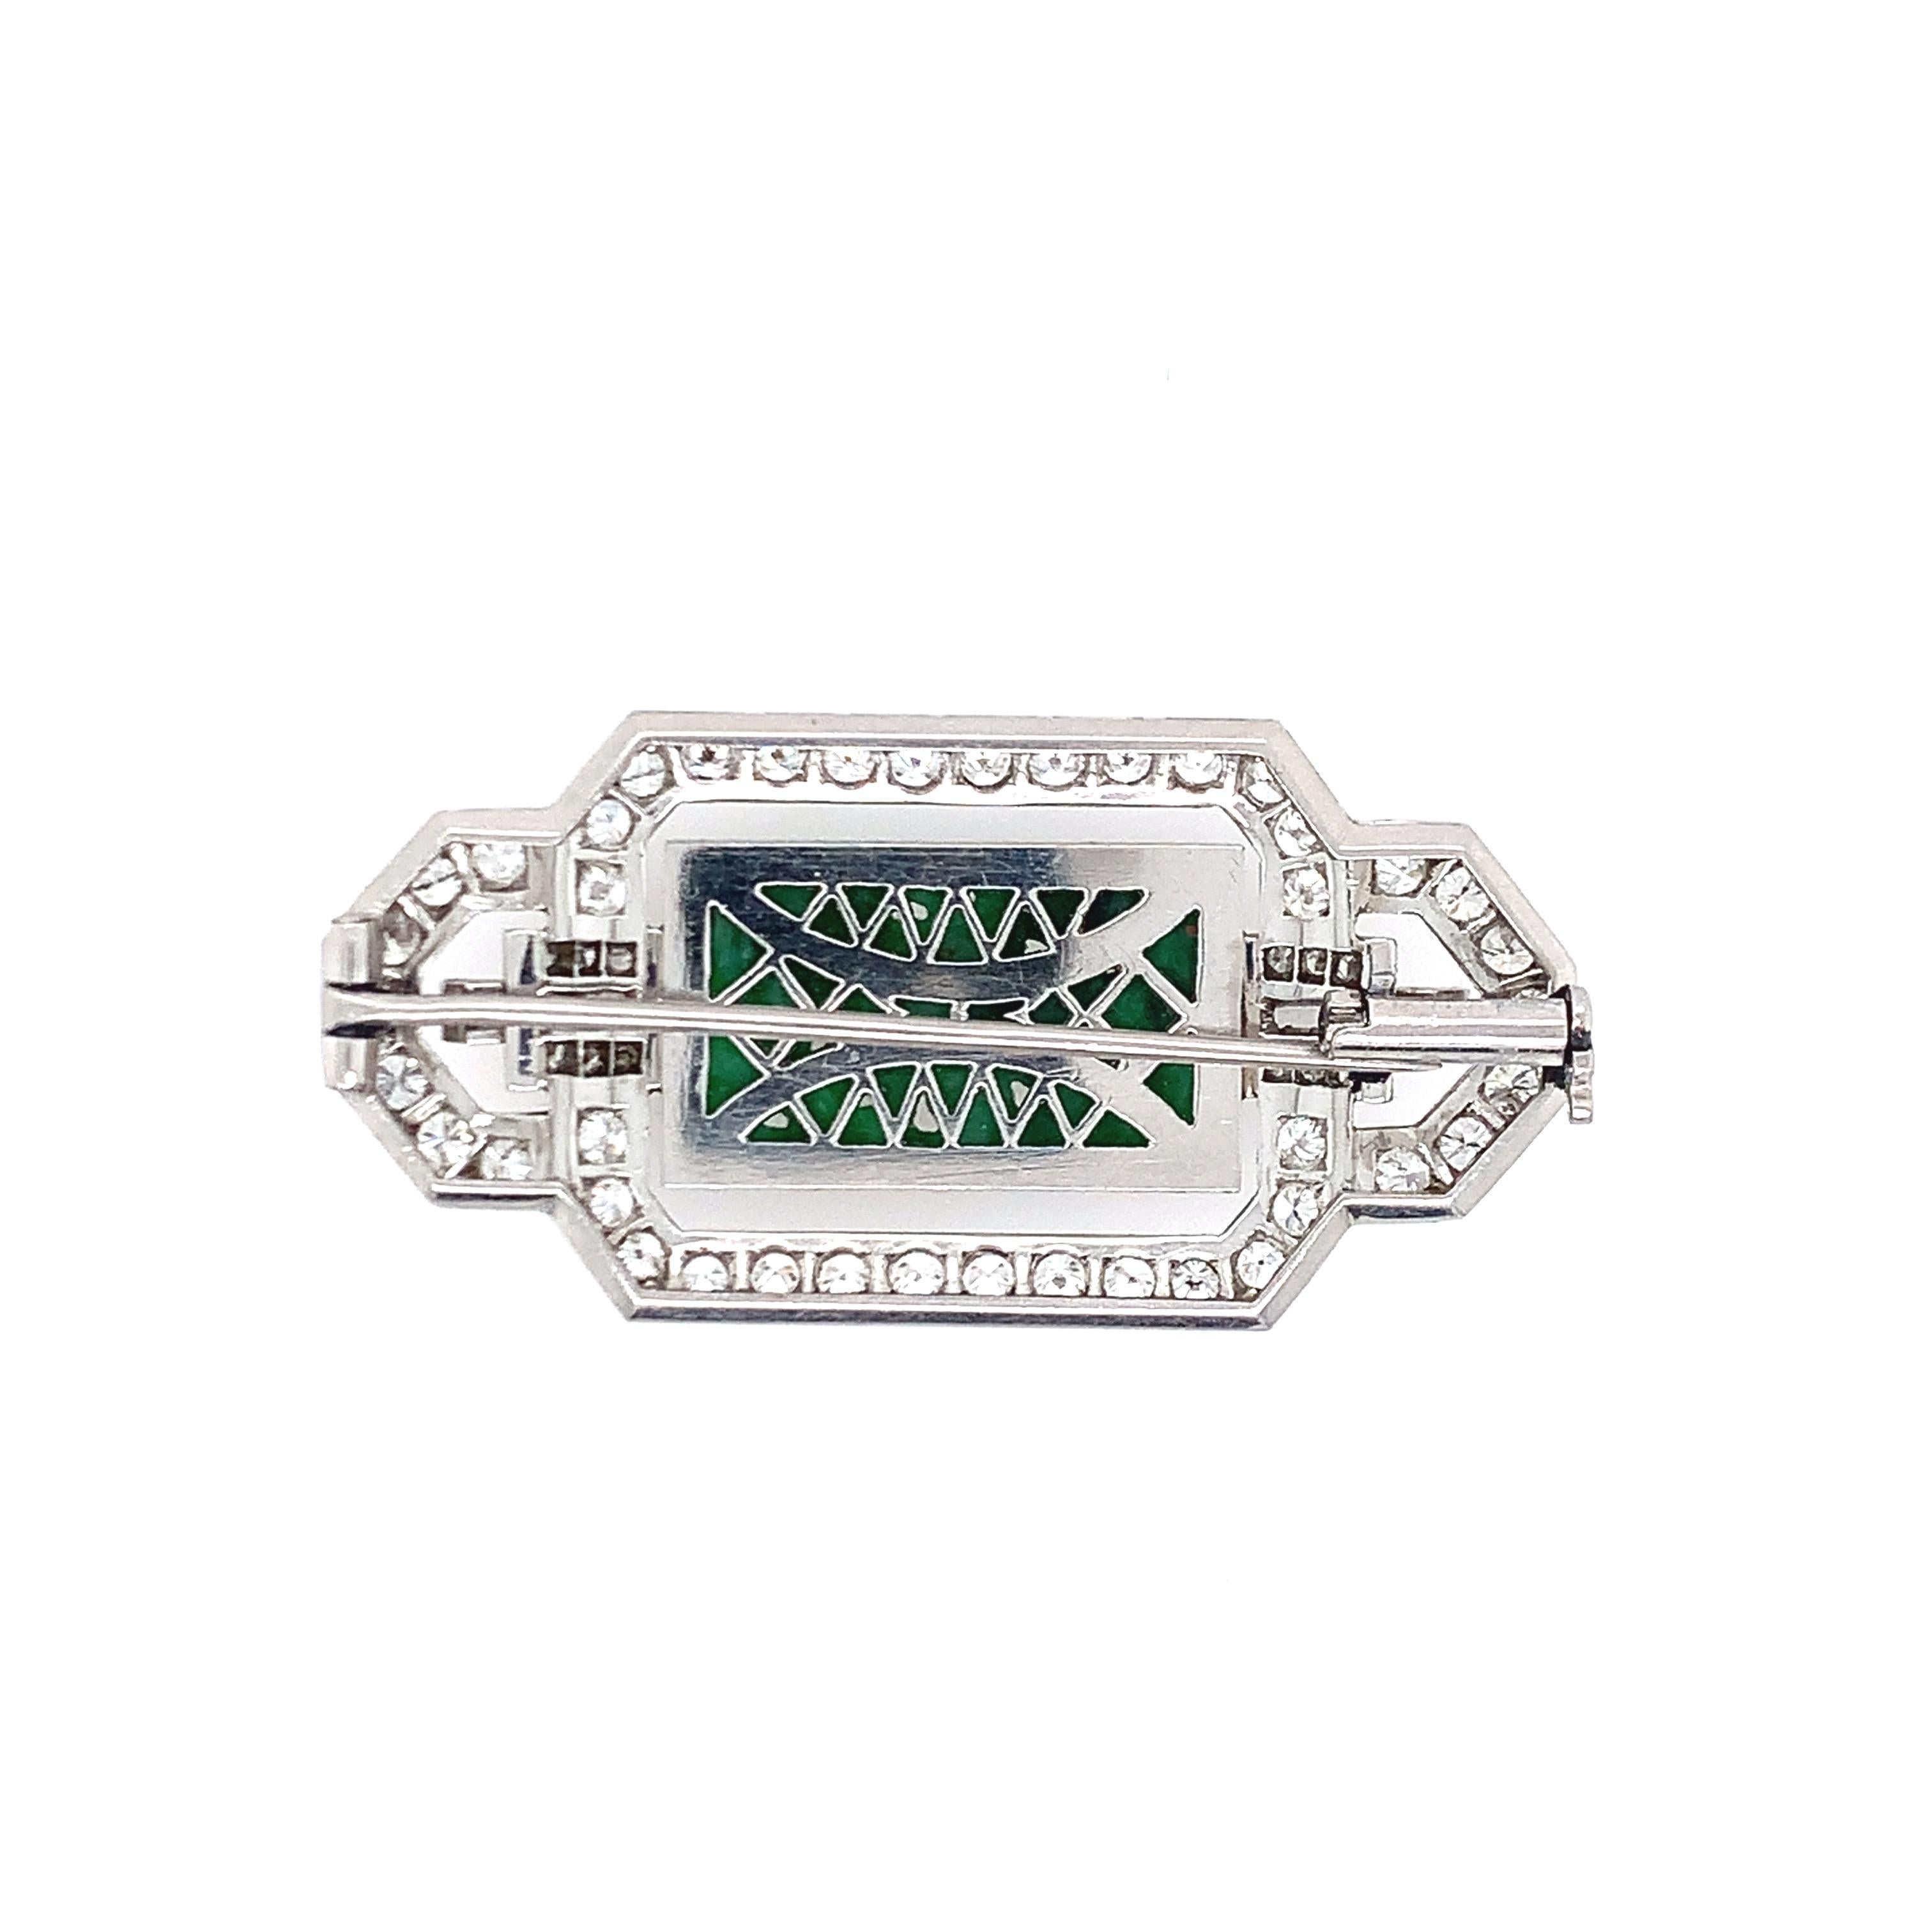 An art deco style brooch, this piece is set in platinum, consisting of approximately 3.5 carat diamonds with natural, type A jade at the center. The length is 0.88 inch and the width is 1.88 inches. The total weight is 15.7 grams. 